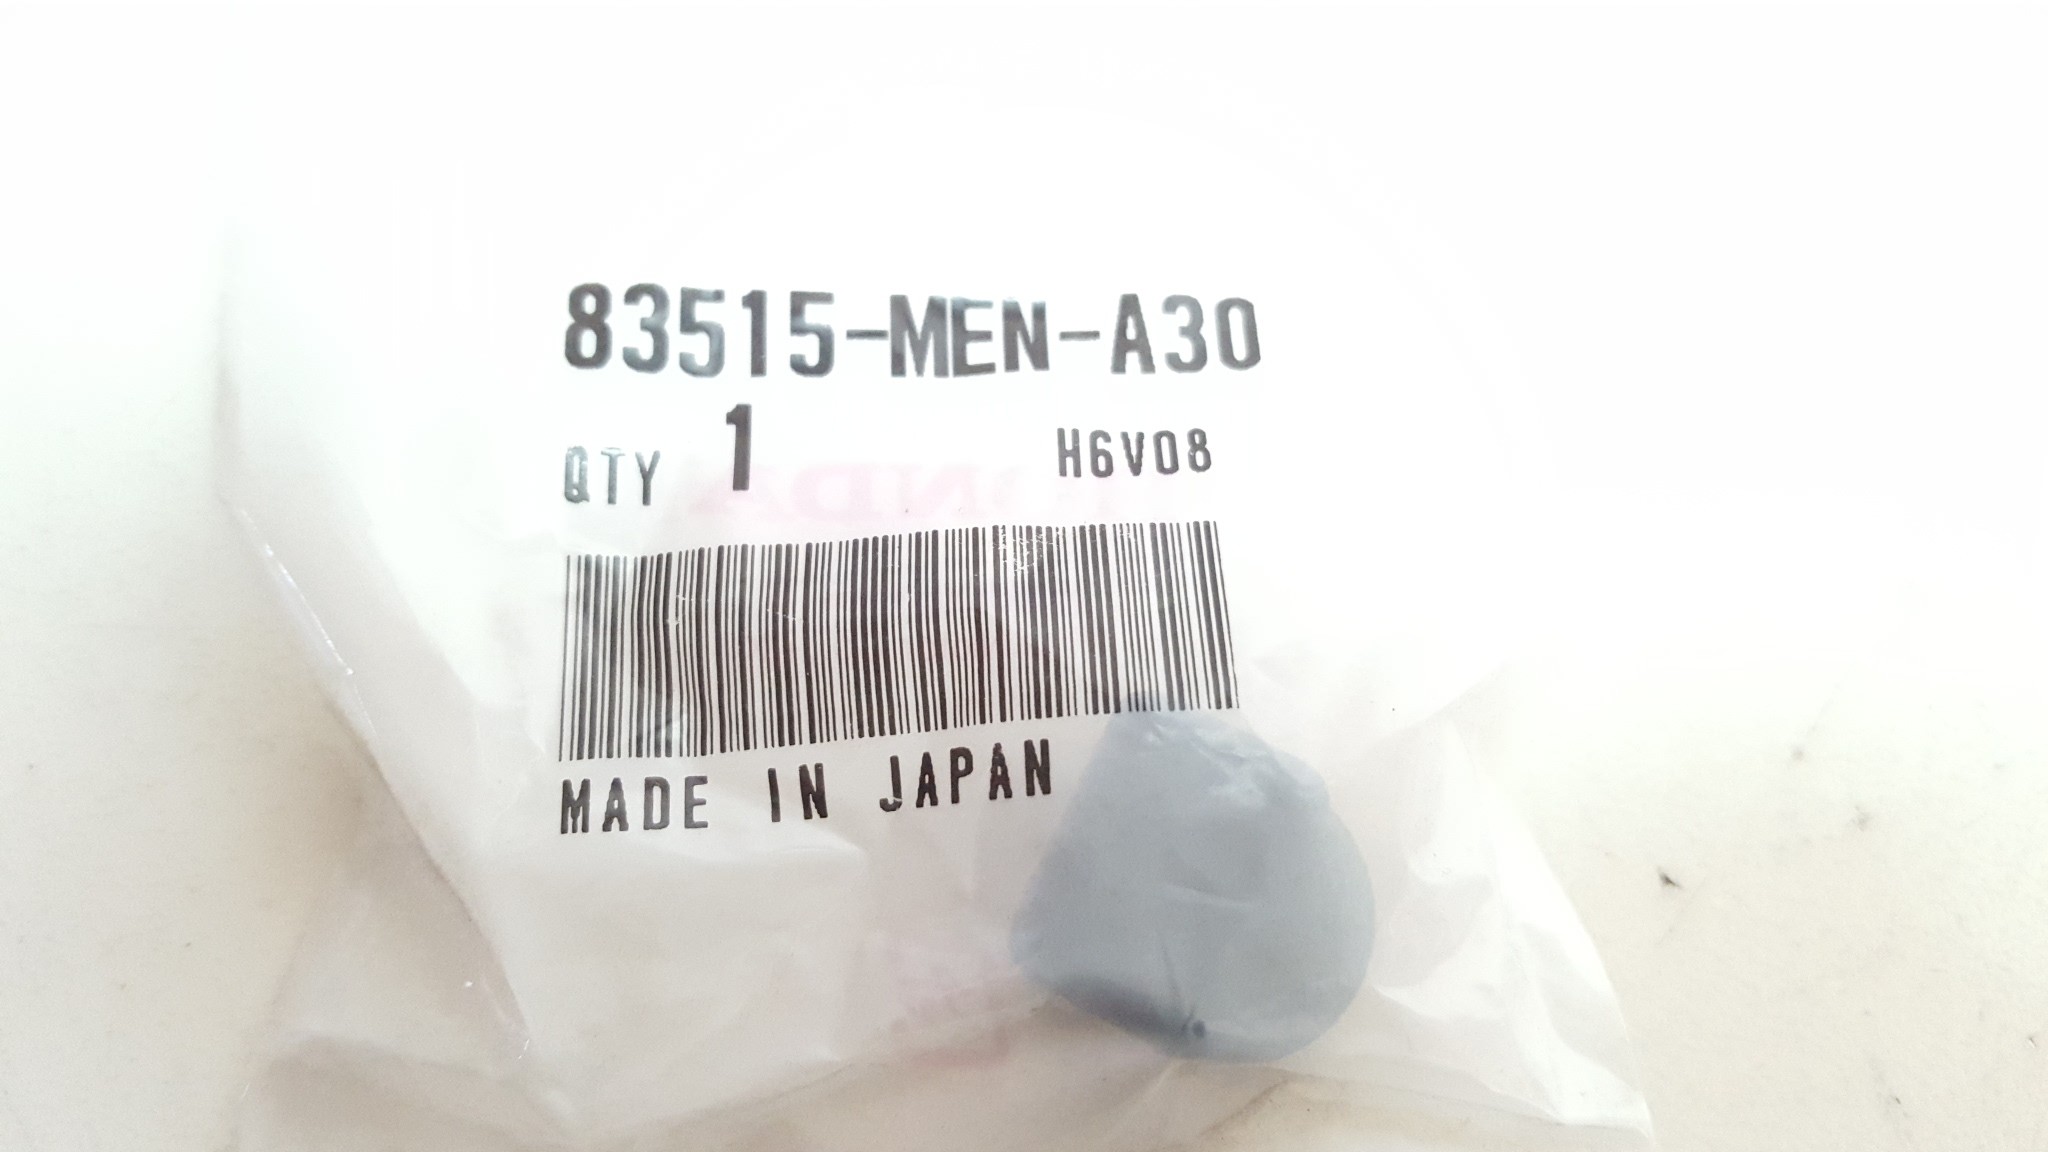 Brand New Genuine Honda Right Side Cover Stopper Rubber CRF250R CRF450R 09-13 CRF 250 450 R #NHS